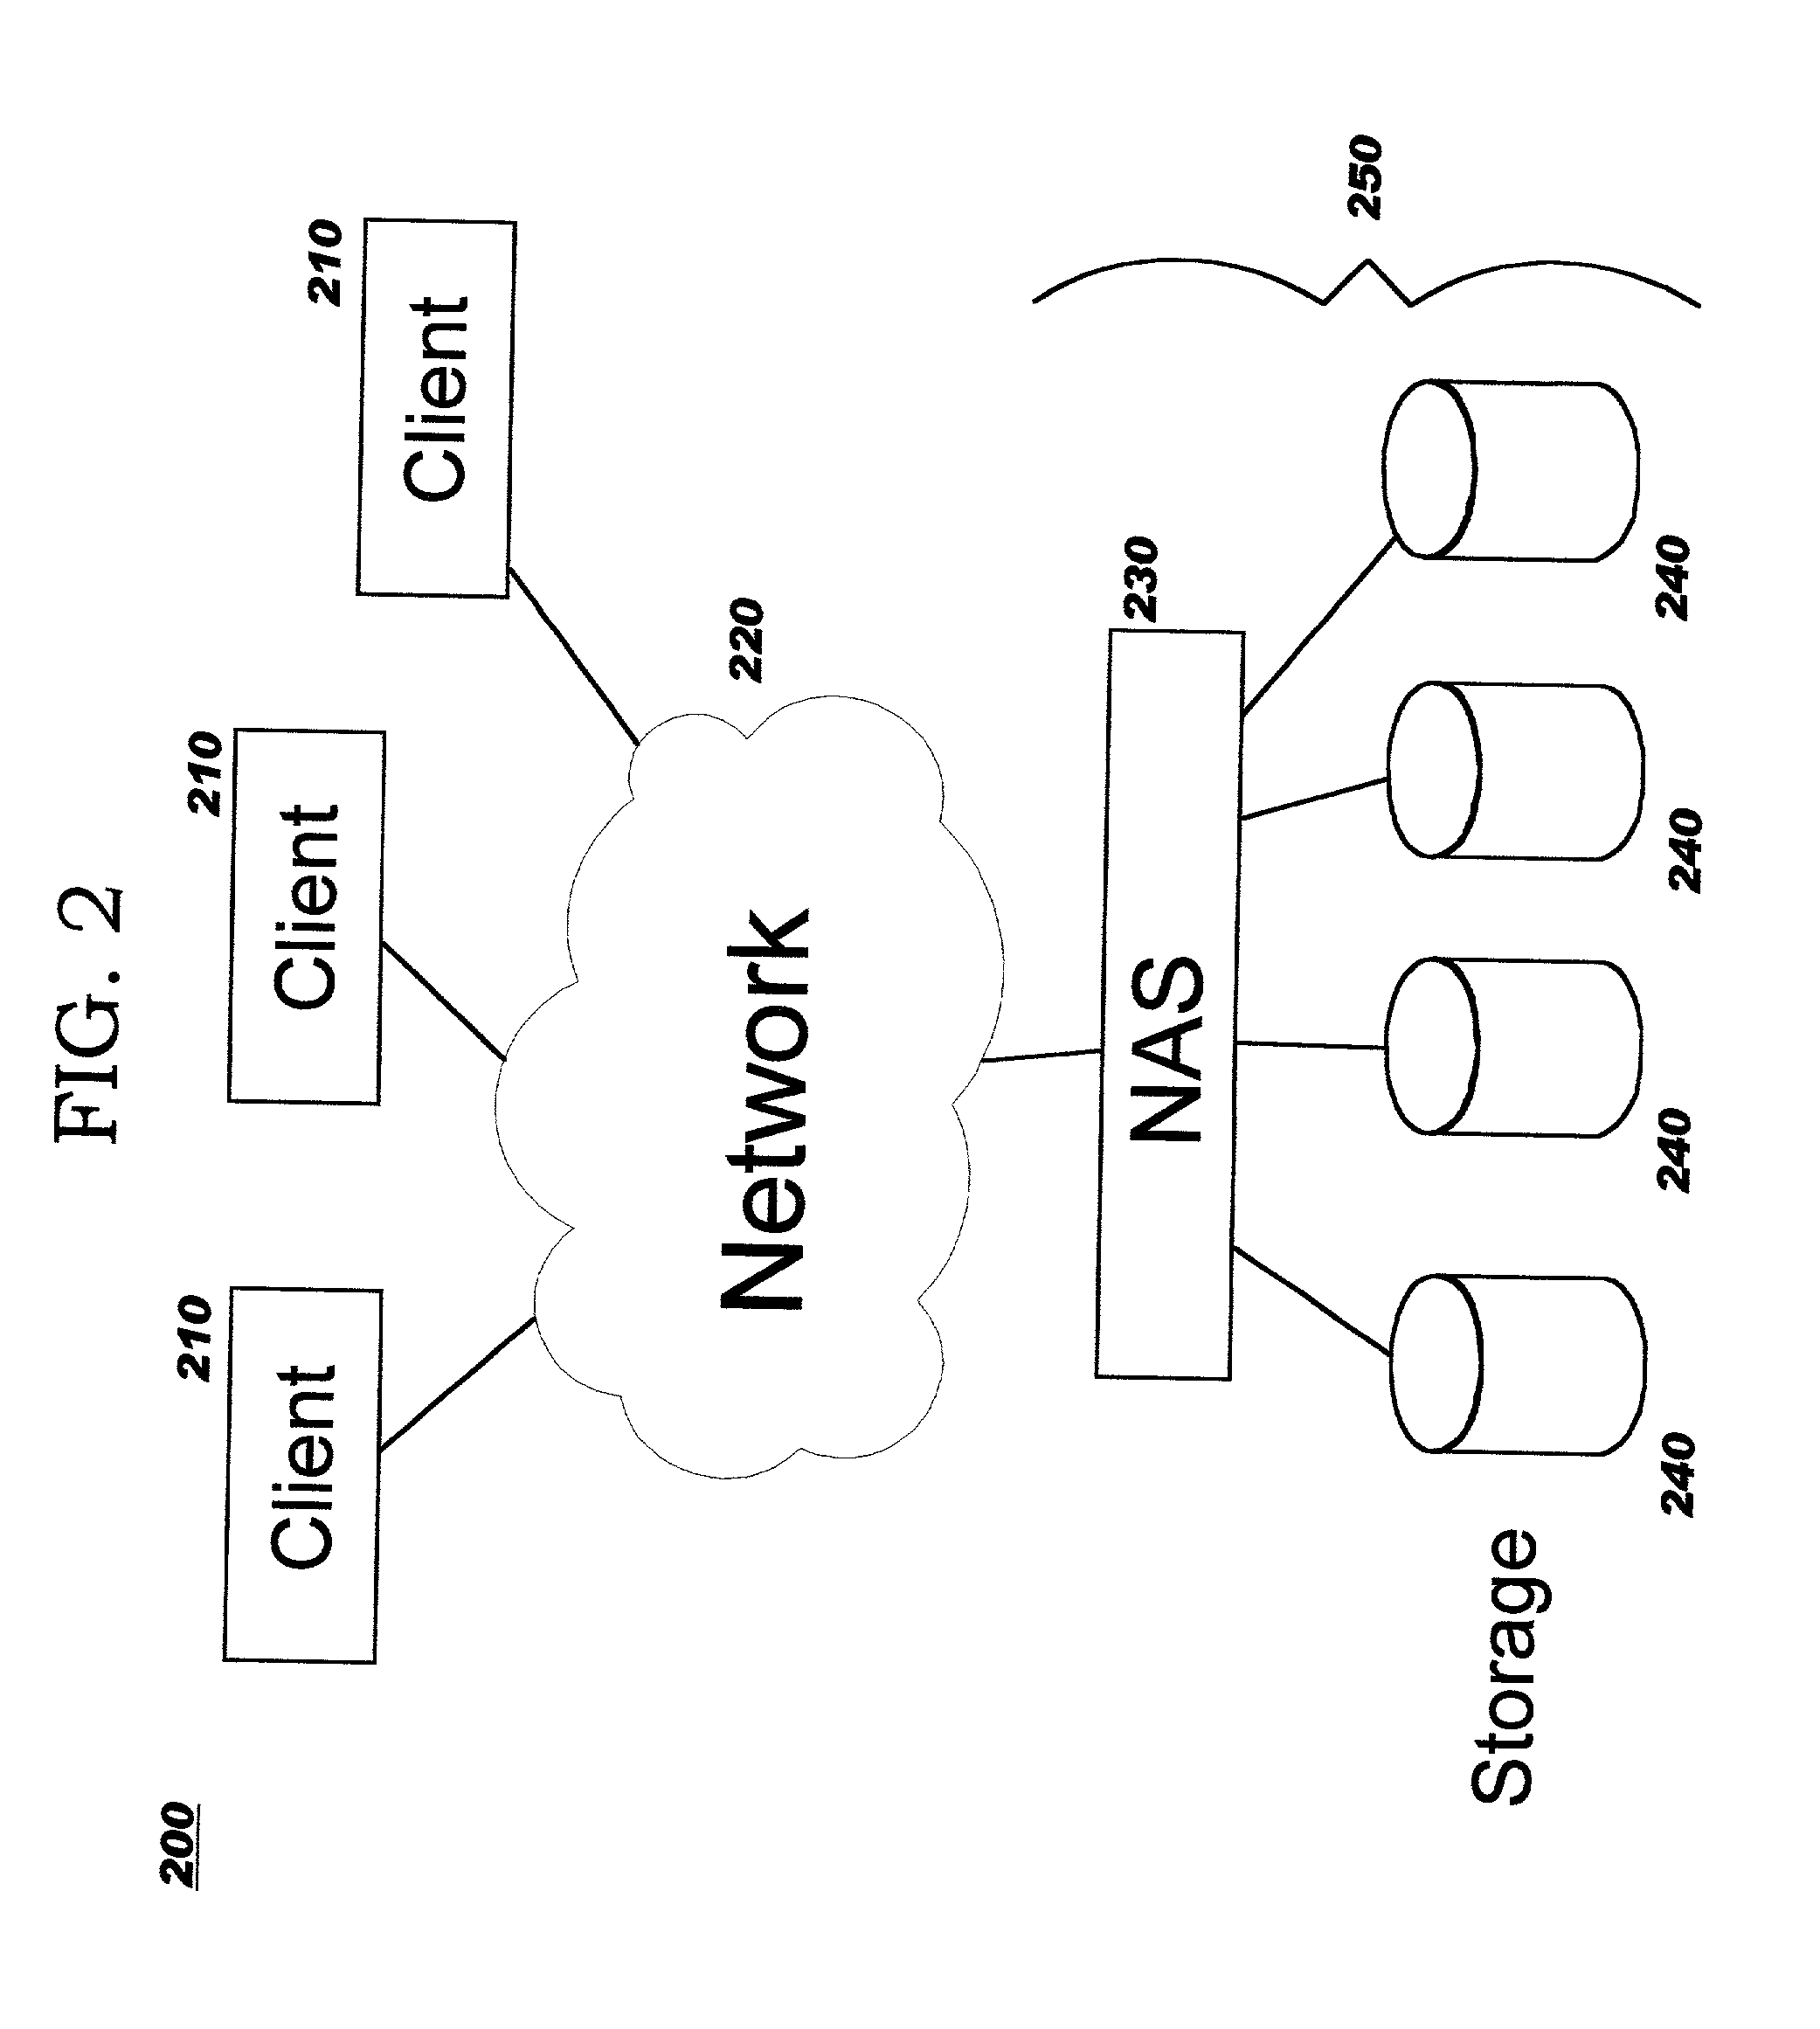 Efficiently serving large objects in a distributed computing network